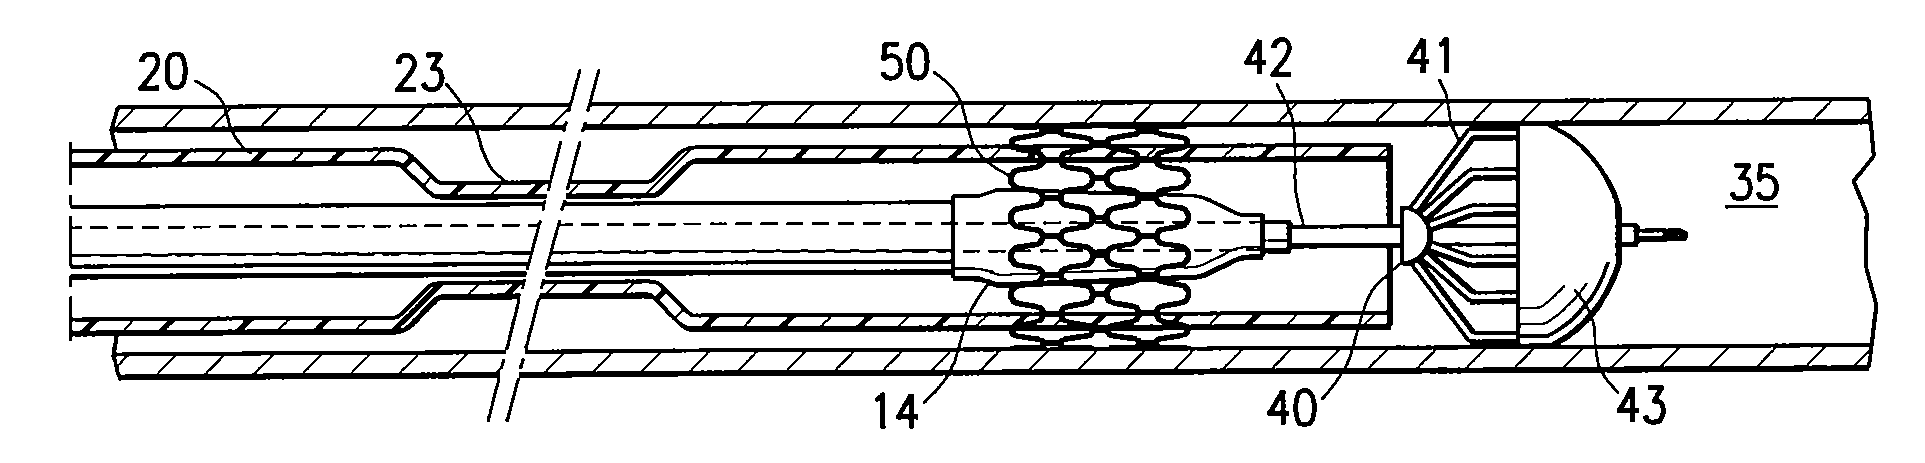 Highly trackable balloon catheter system and method for collapsing an expanded medical device